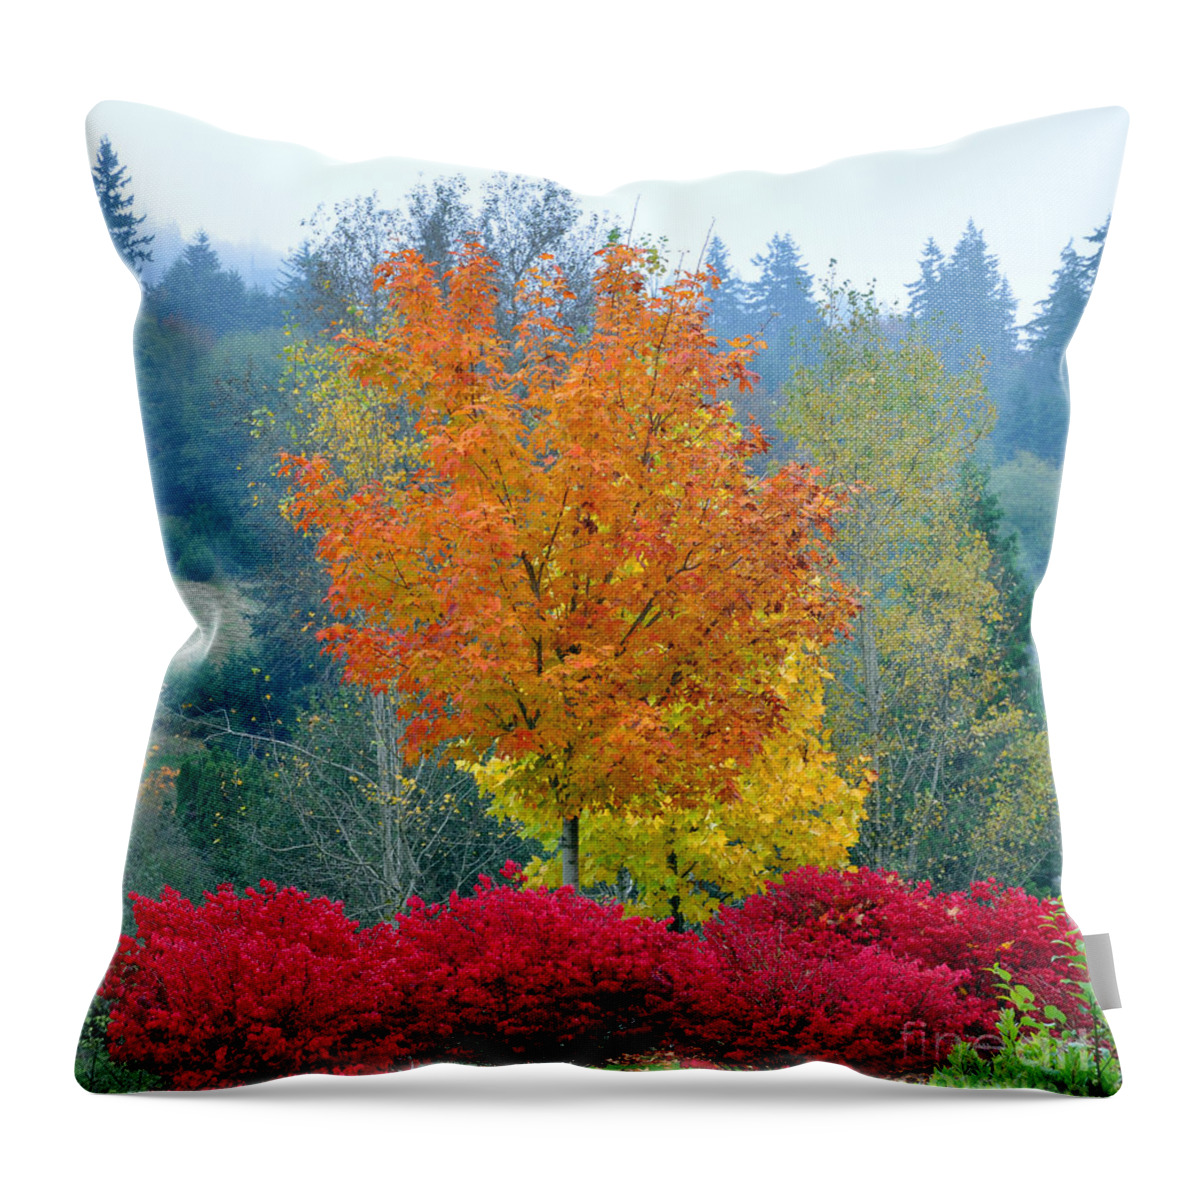 Autumn Throw Pillow featuring the photograph The Flame by Kirt Tisdale